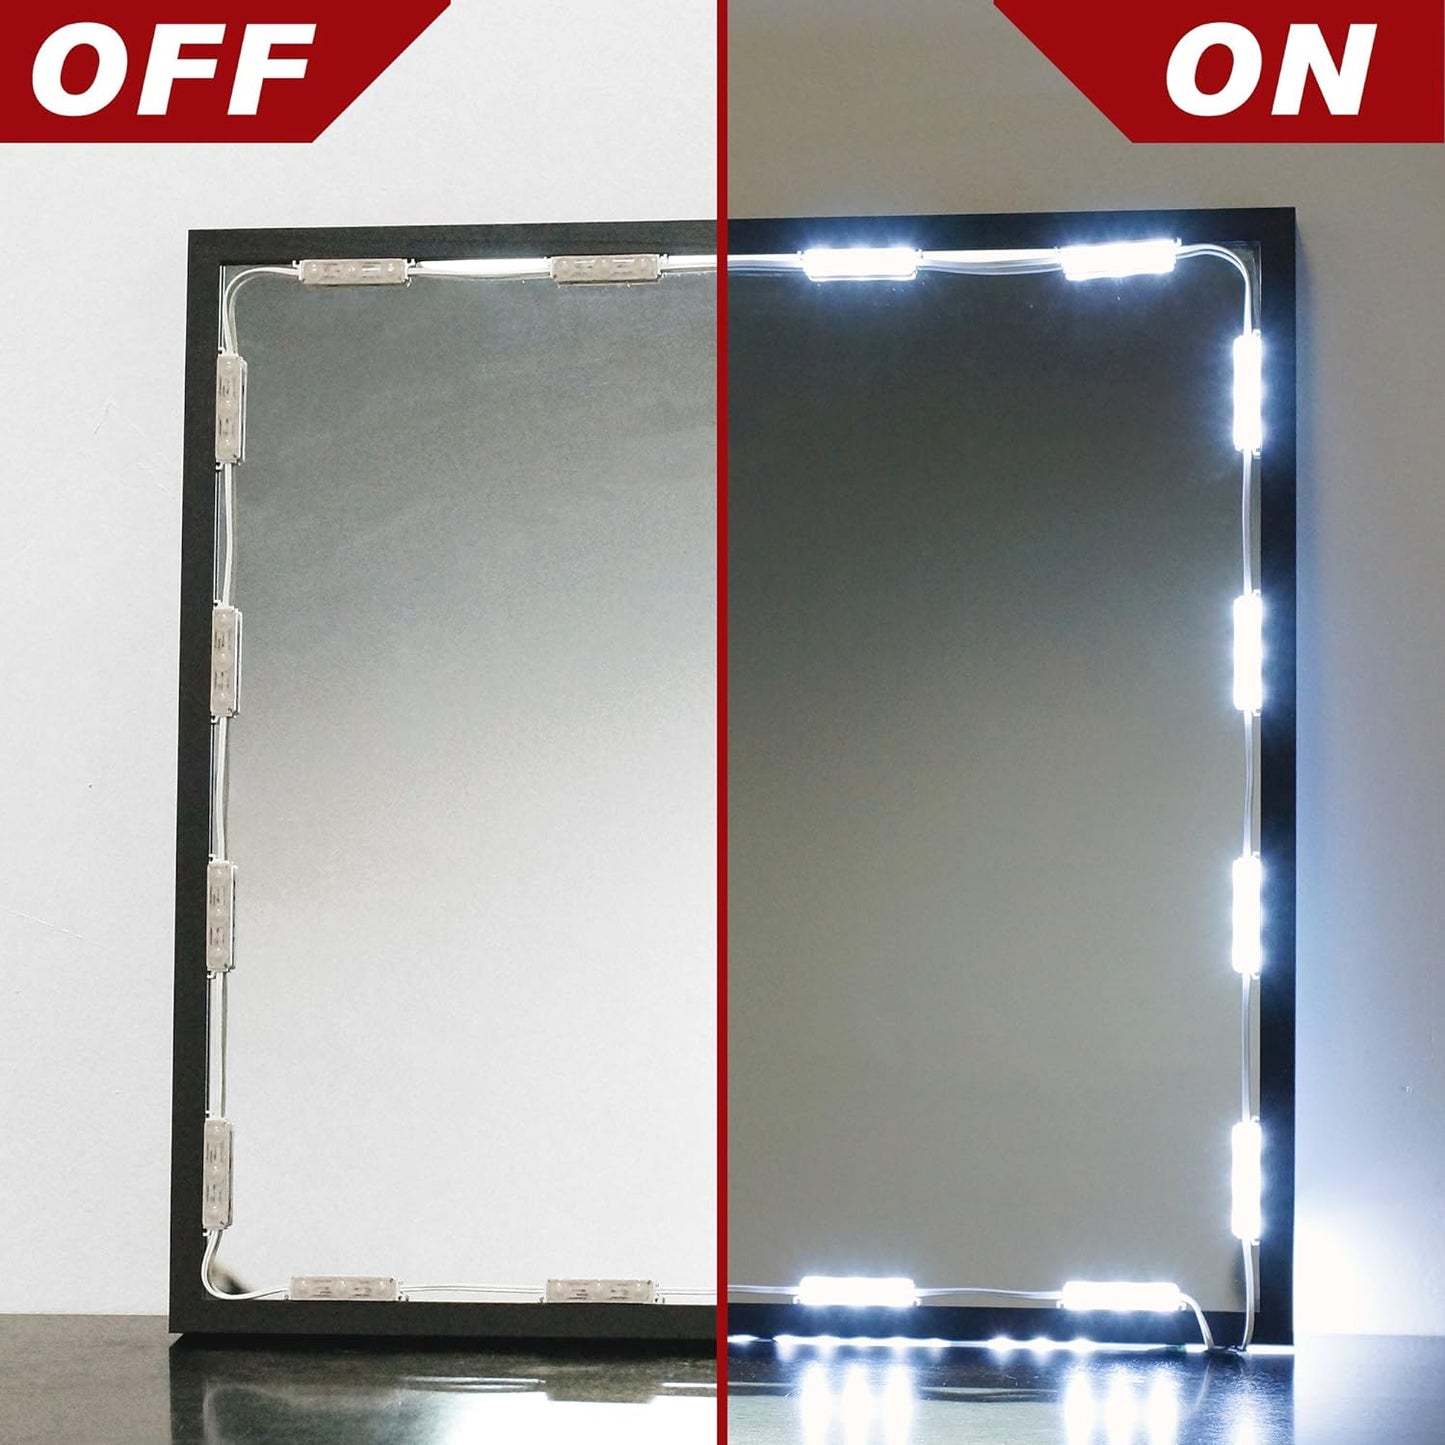 The image displays a before and after effect of a LED light kit installed on a mirror, with the left side showing the lights turned off and the right side showing them turned on. The LED modules, when lit, provide a bright, clear light that enhances the mirror's visibility. This demonstrates the effective illumination capability of the LED kit.